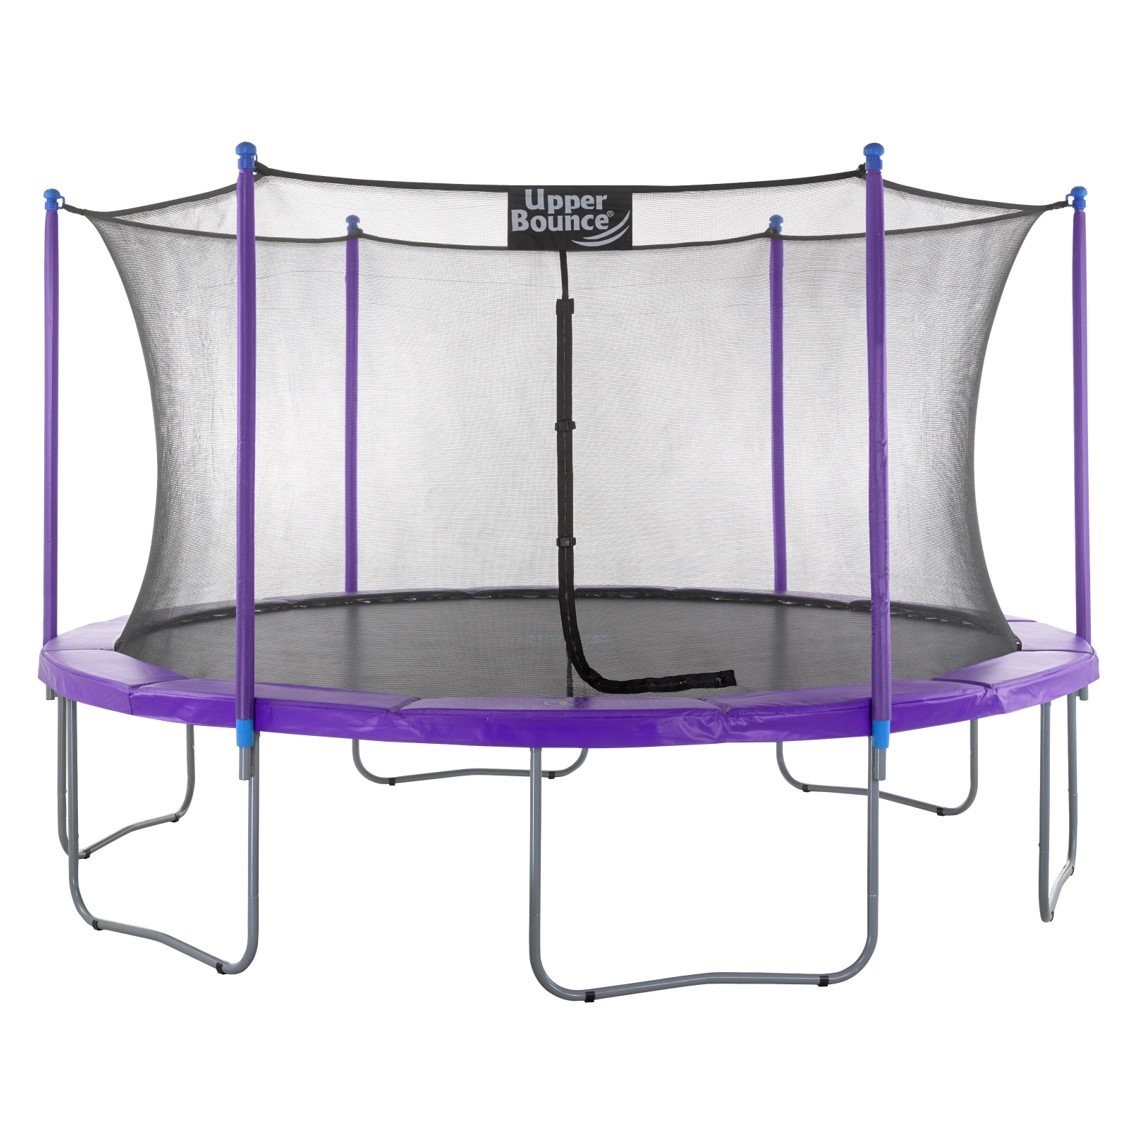 15Ft Large Trampoline and Enclosure Set | Garden & Outdoor Trampoline with Safety Net, Mat, Pad | Purple